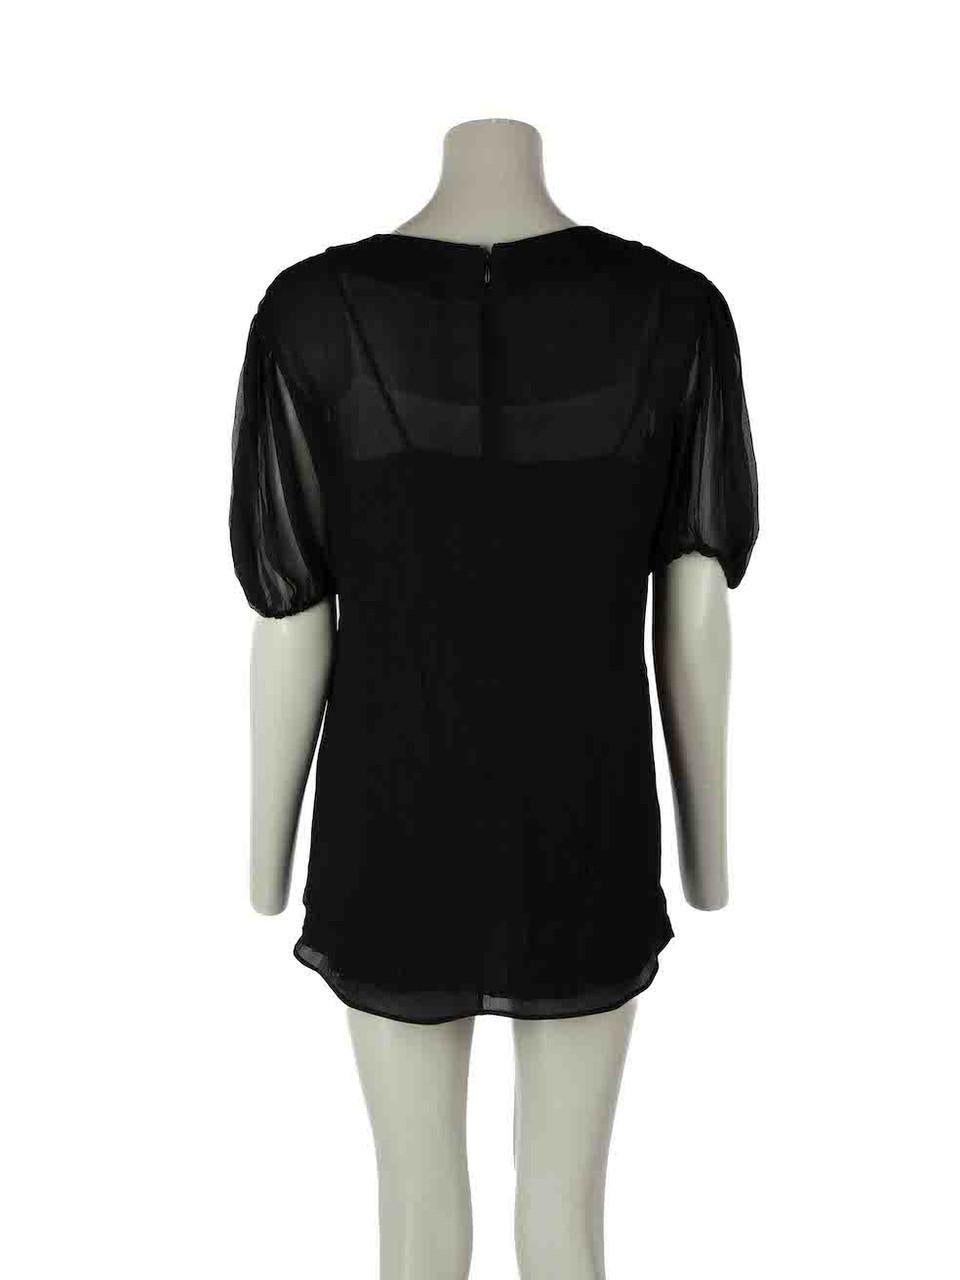 Prada Black Crepe Short Sleeves Top Size S In Good Condition For Sale In London, GB